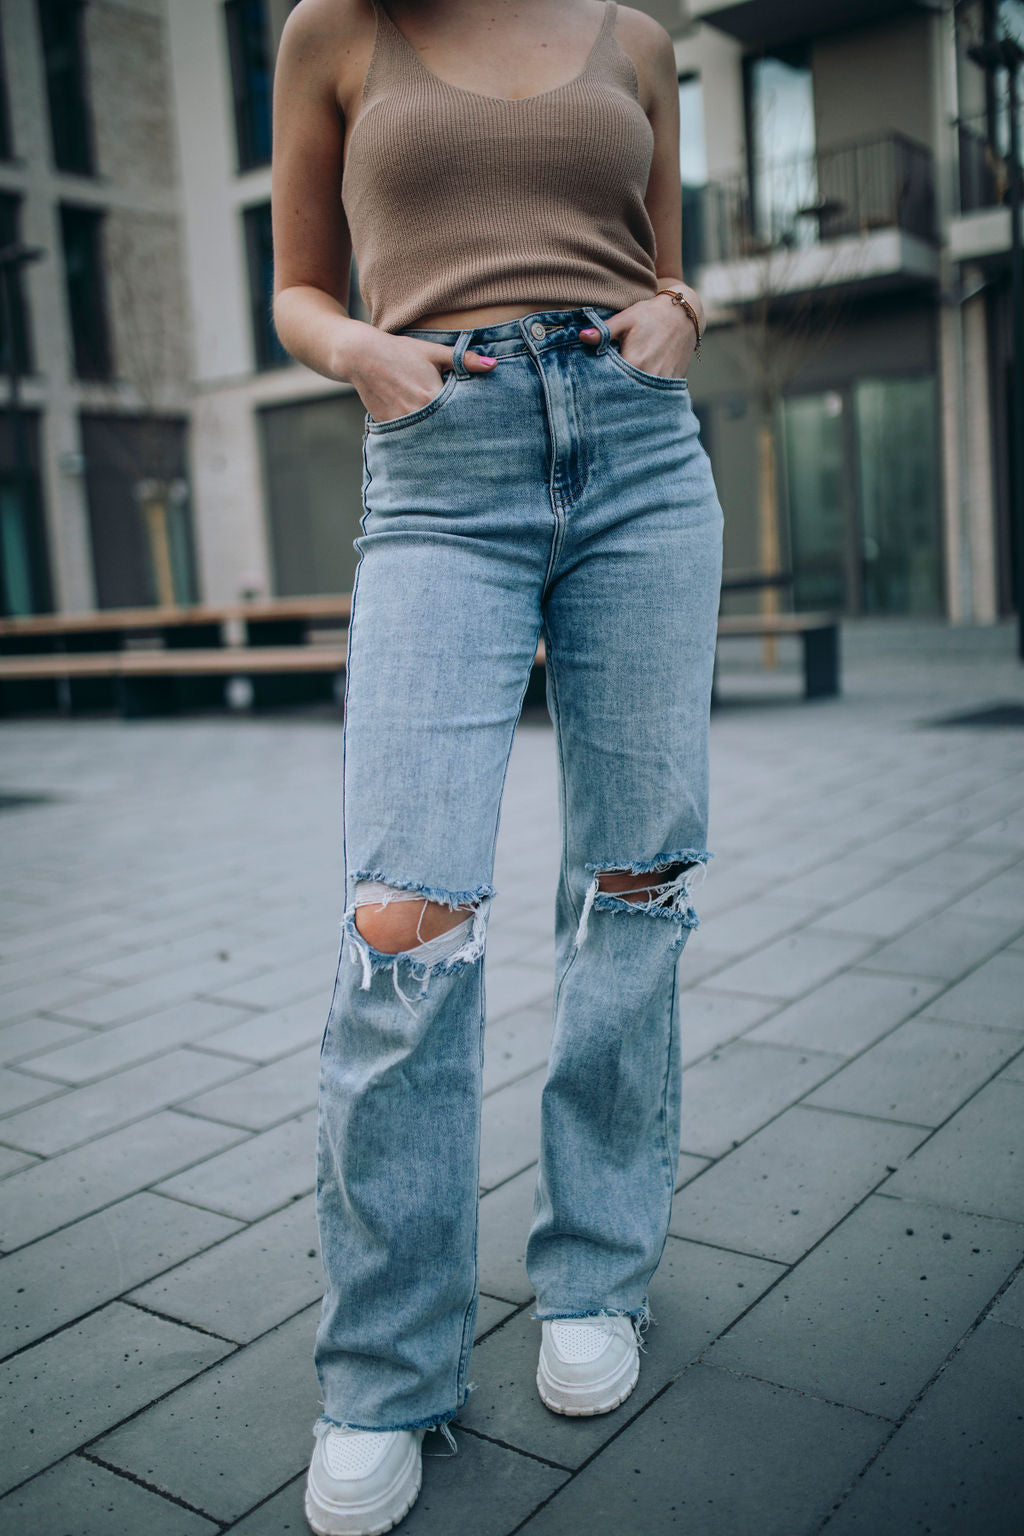 WIDE LEG RIPPED JEANS